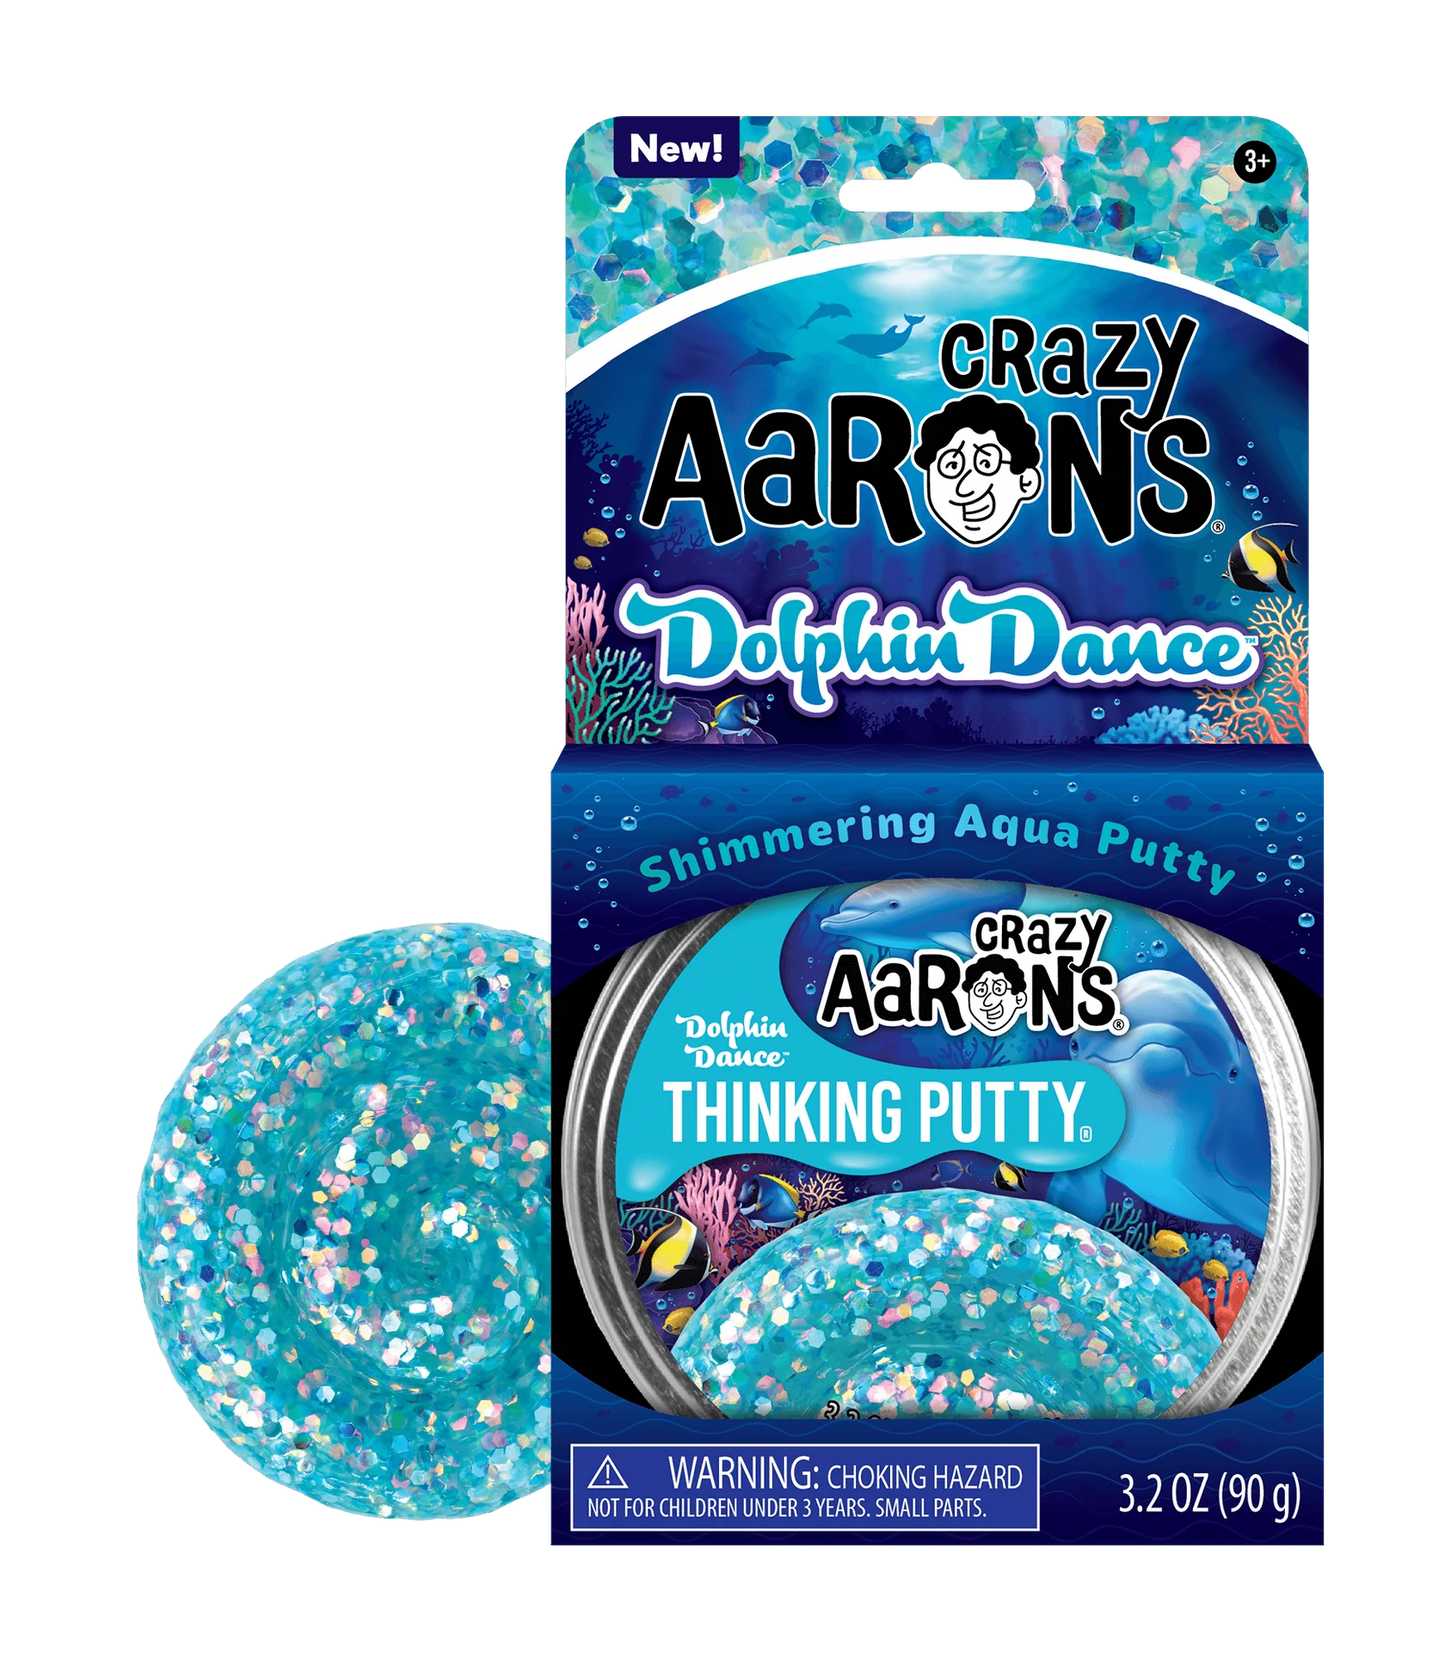 CRAZY AARON'S THINKING PUTTY DOLPHIN DANCE